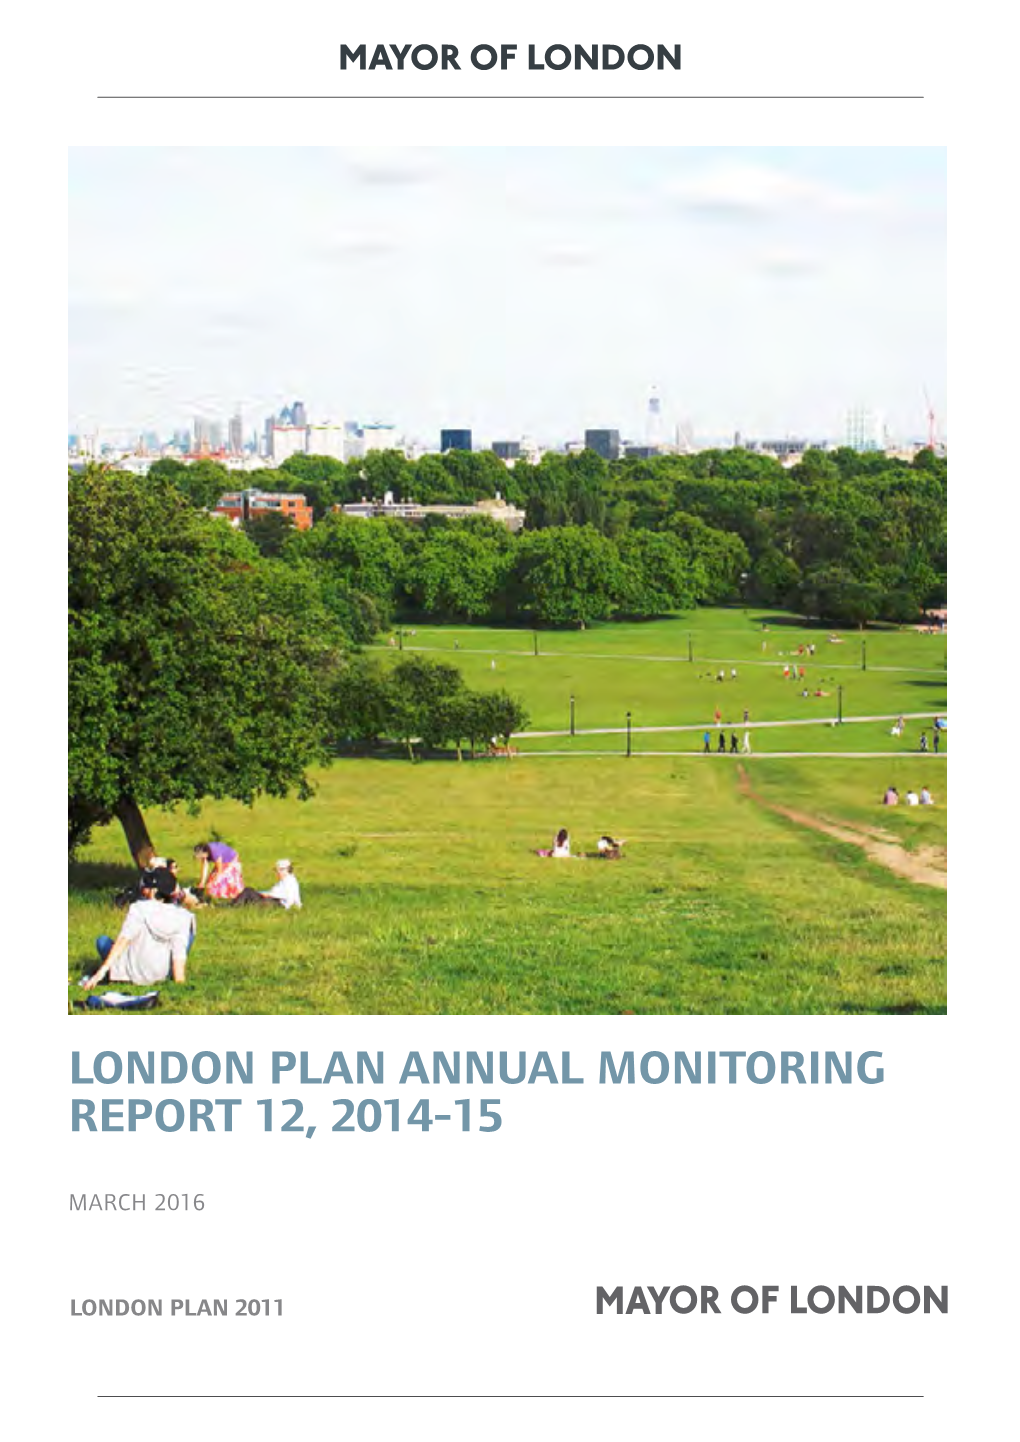 Annual Monitoring Report 12, 2014-15 March 2016